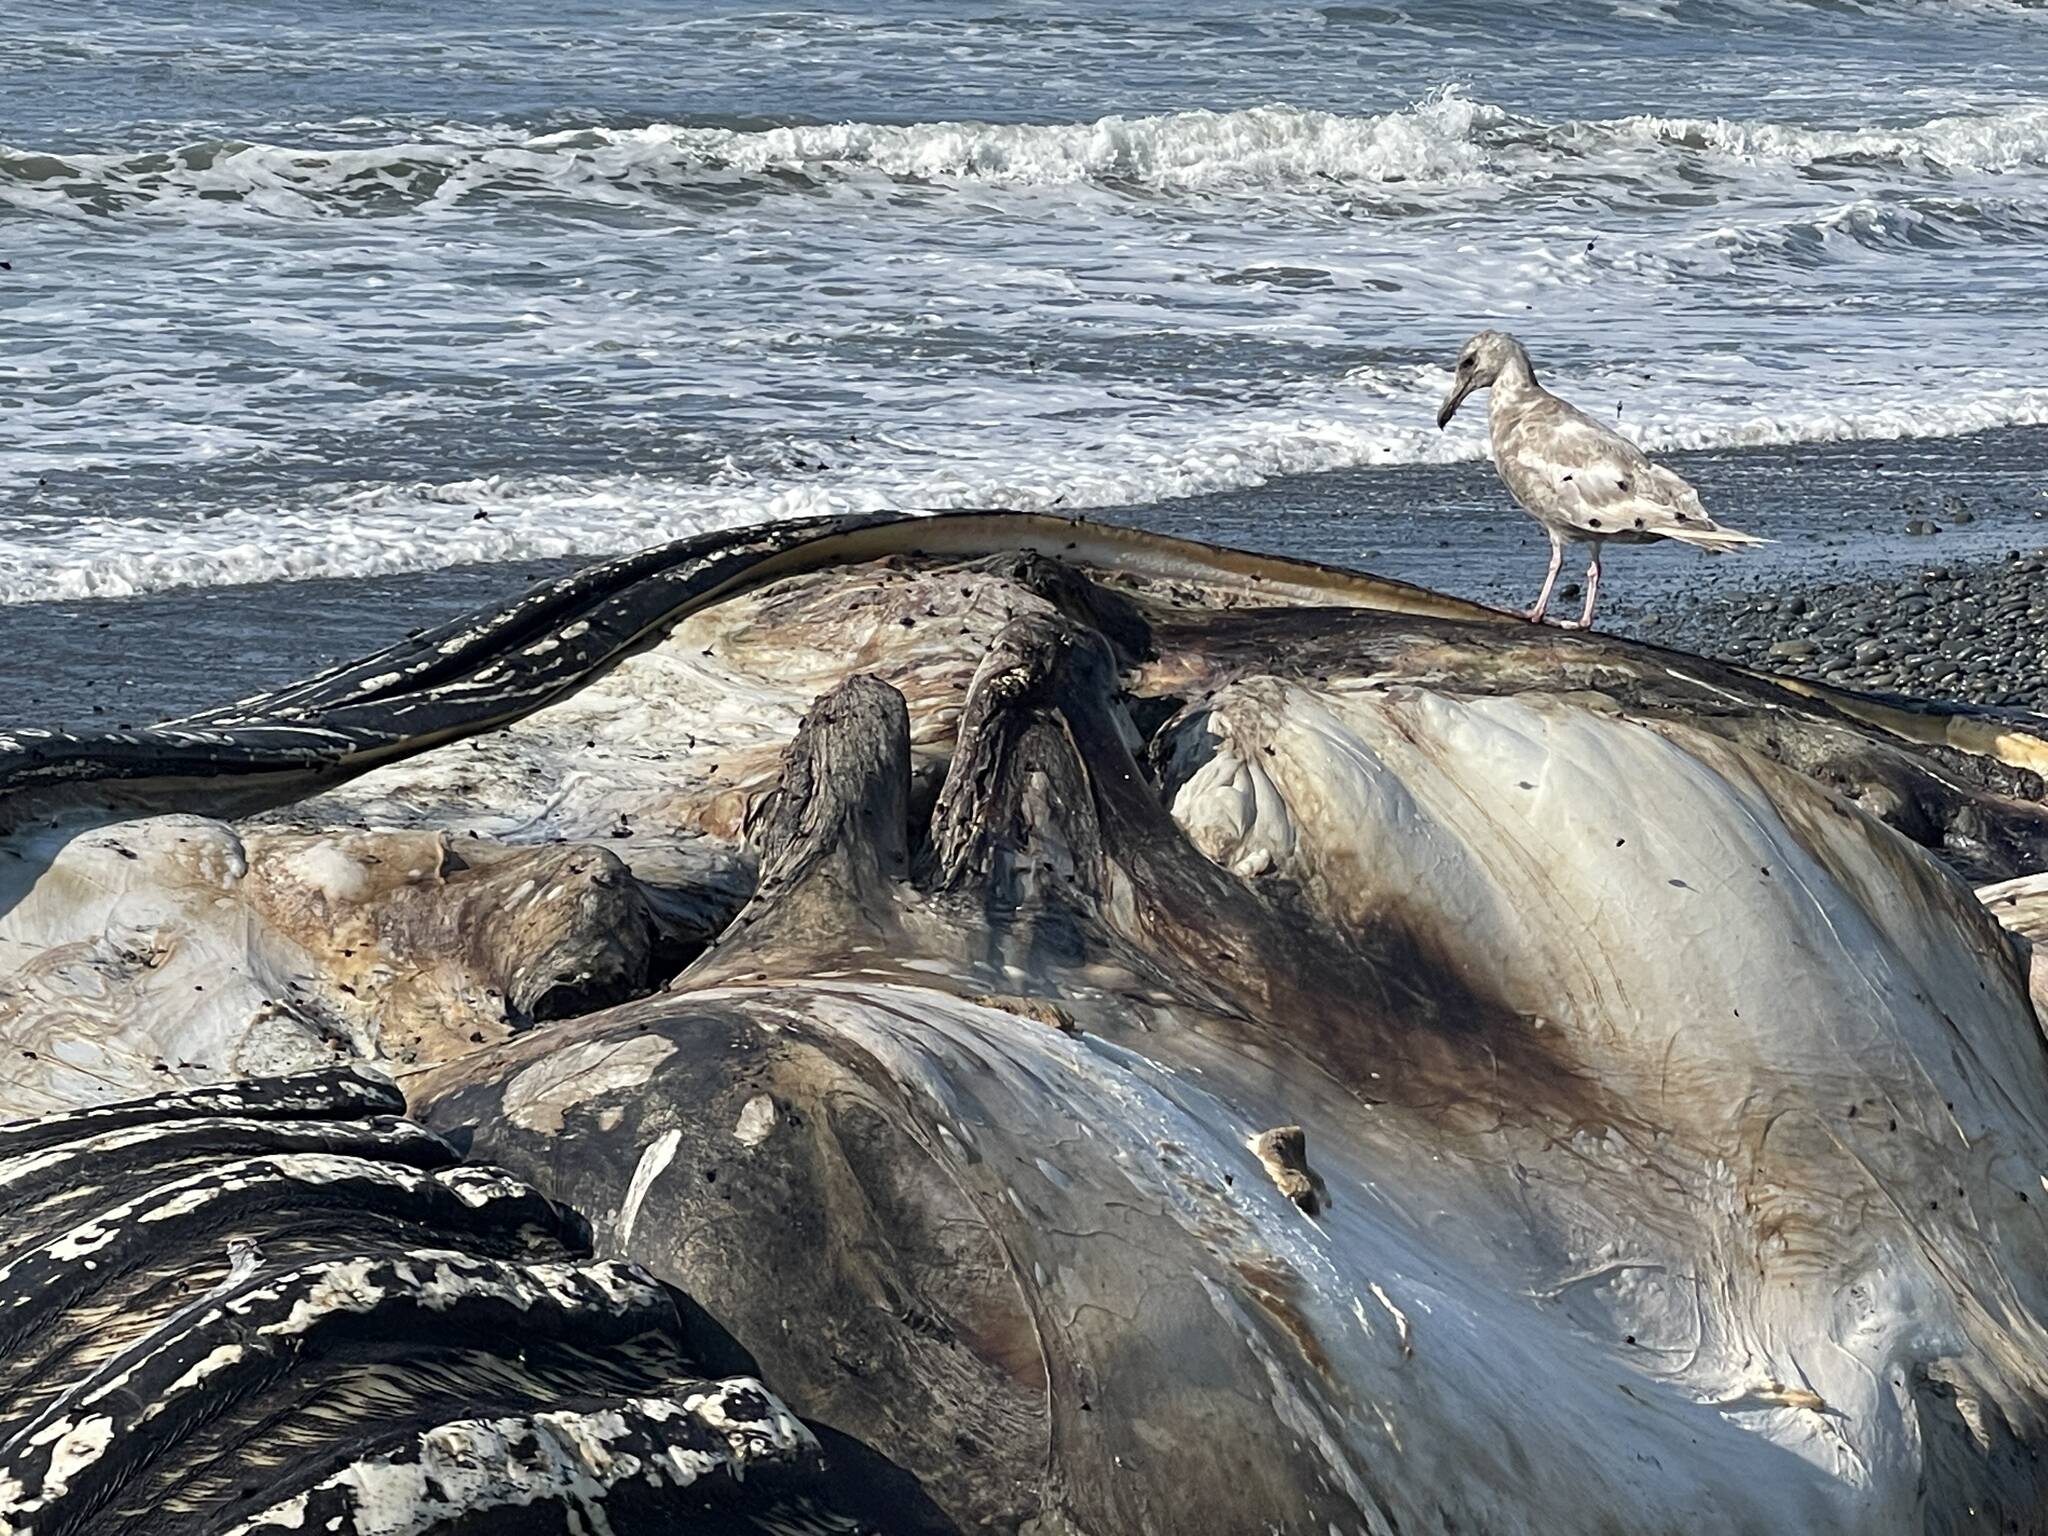 Michael S. Lockett | The Daily World 
A stubborn shorebird continues to gnaw at the corpse of a humpback whale despite clouds of flies attracted to the rot near Ruby Beach on Oct. 15.